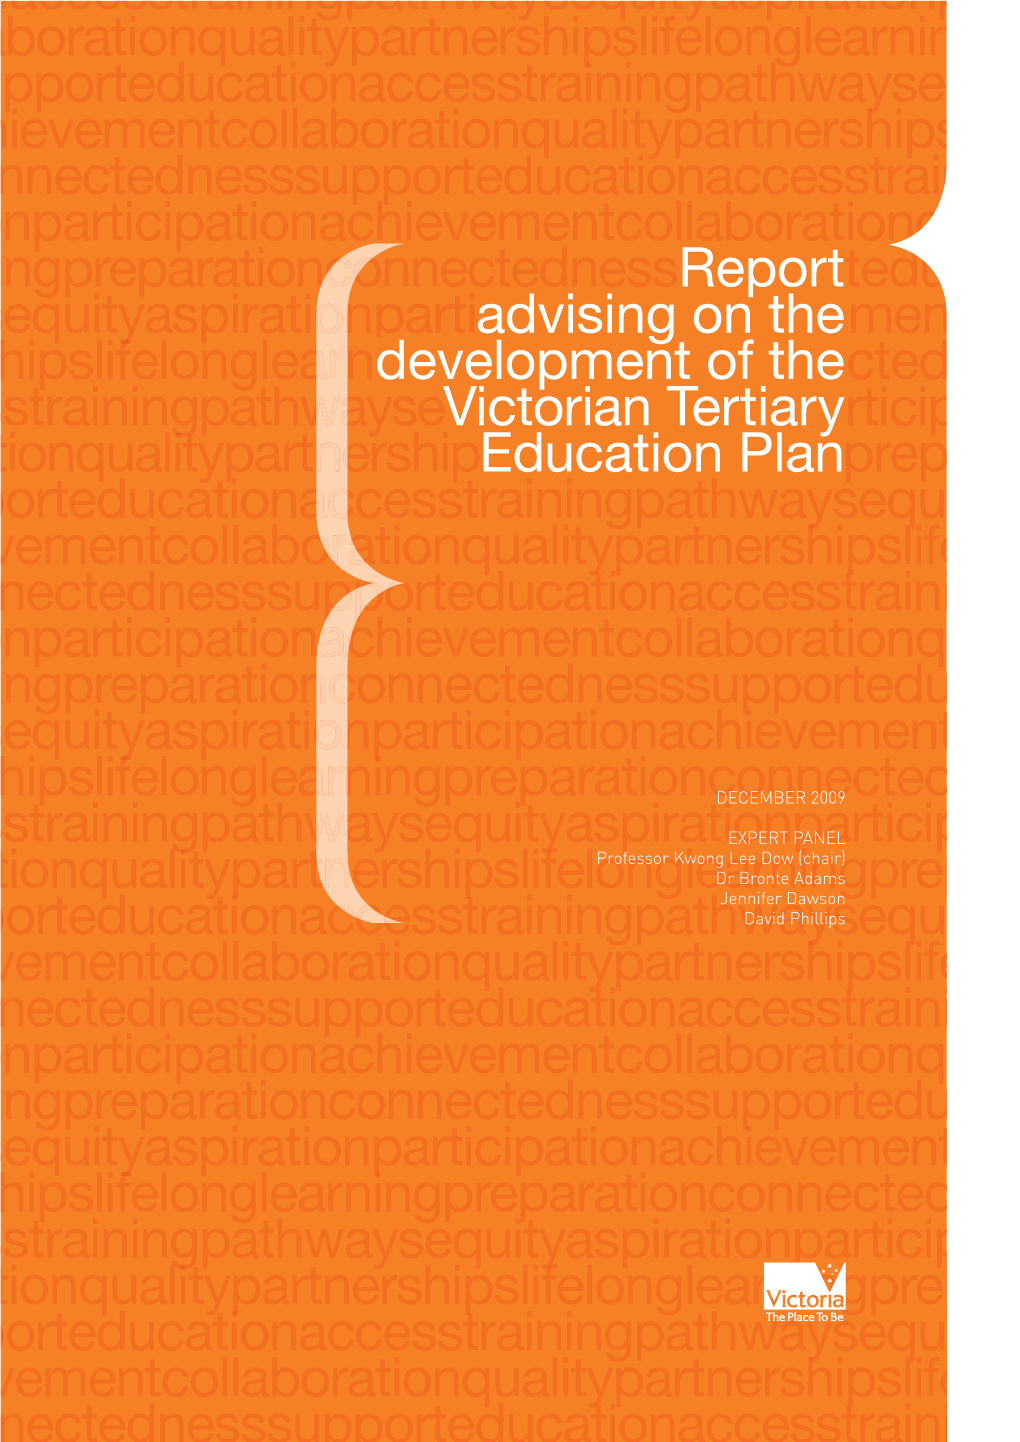 Report Advising on the Development of the Victorian Tertiary Education Plan